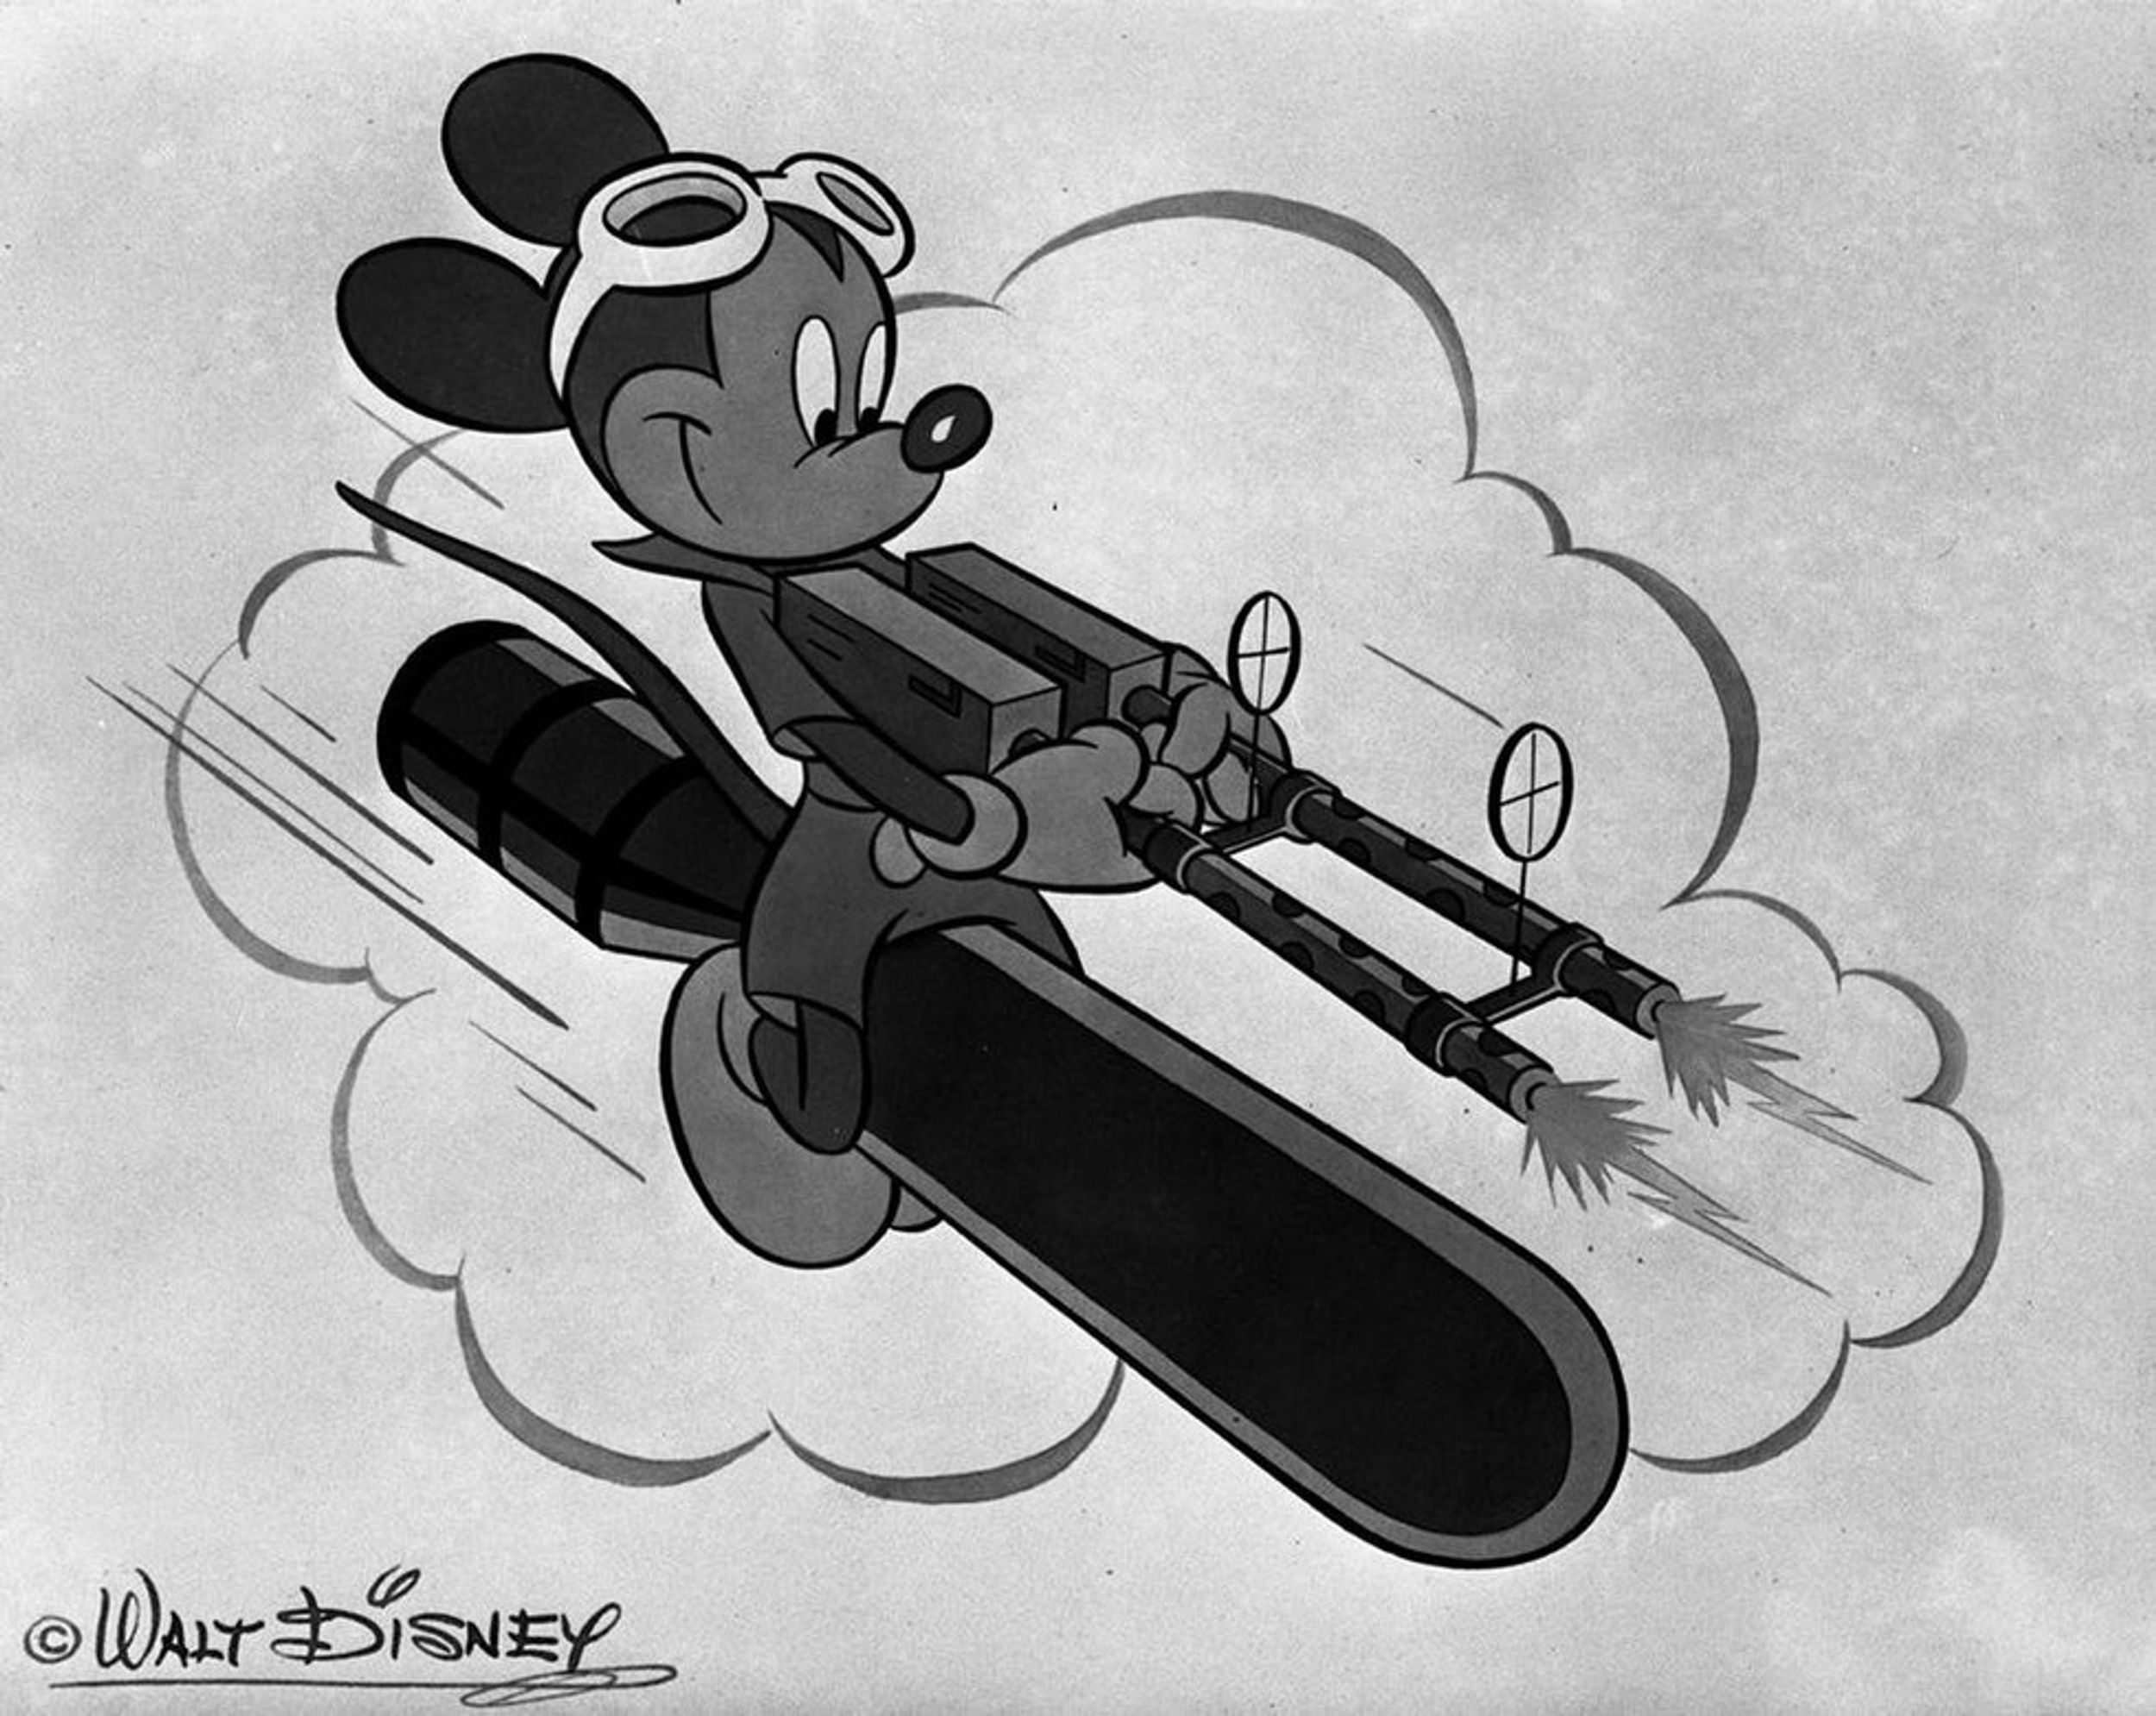 Disney: From Entertainment To WWII Propaganda